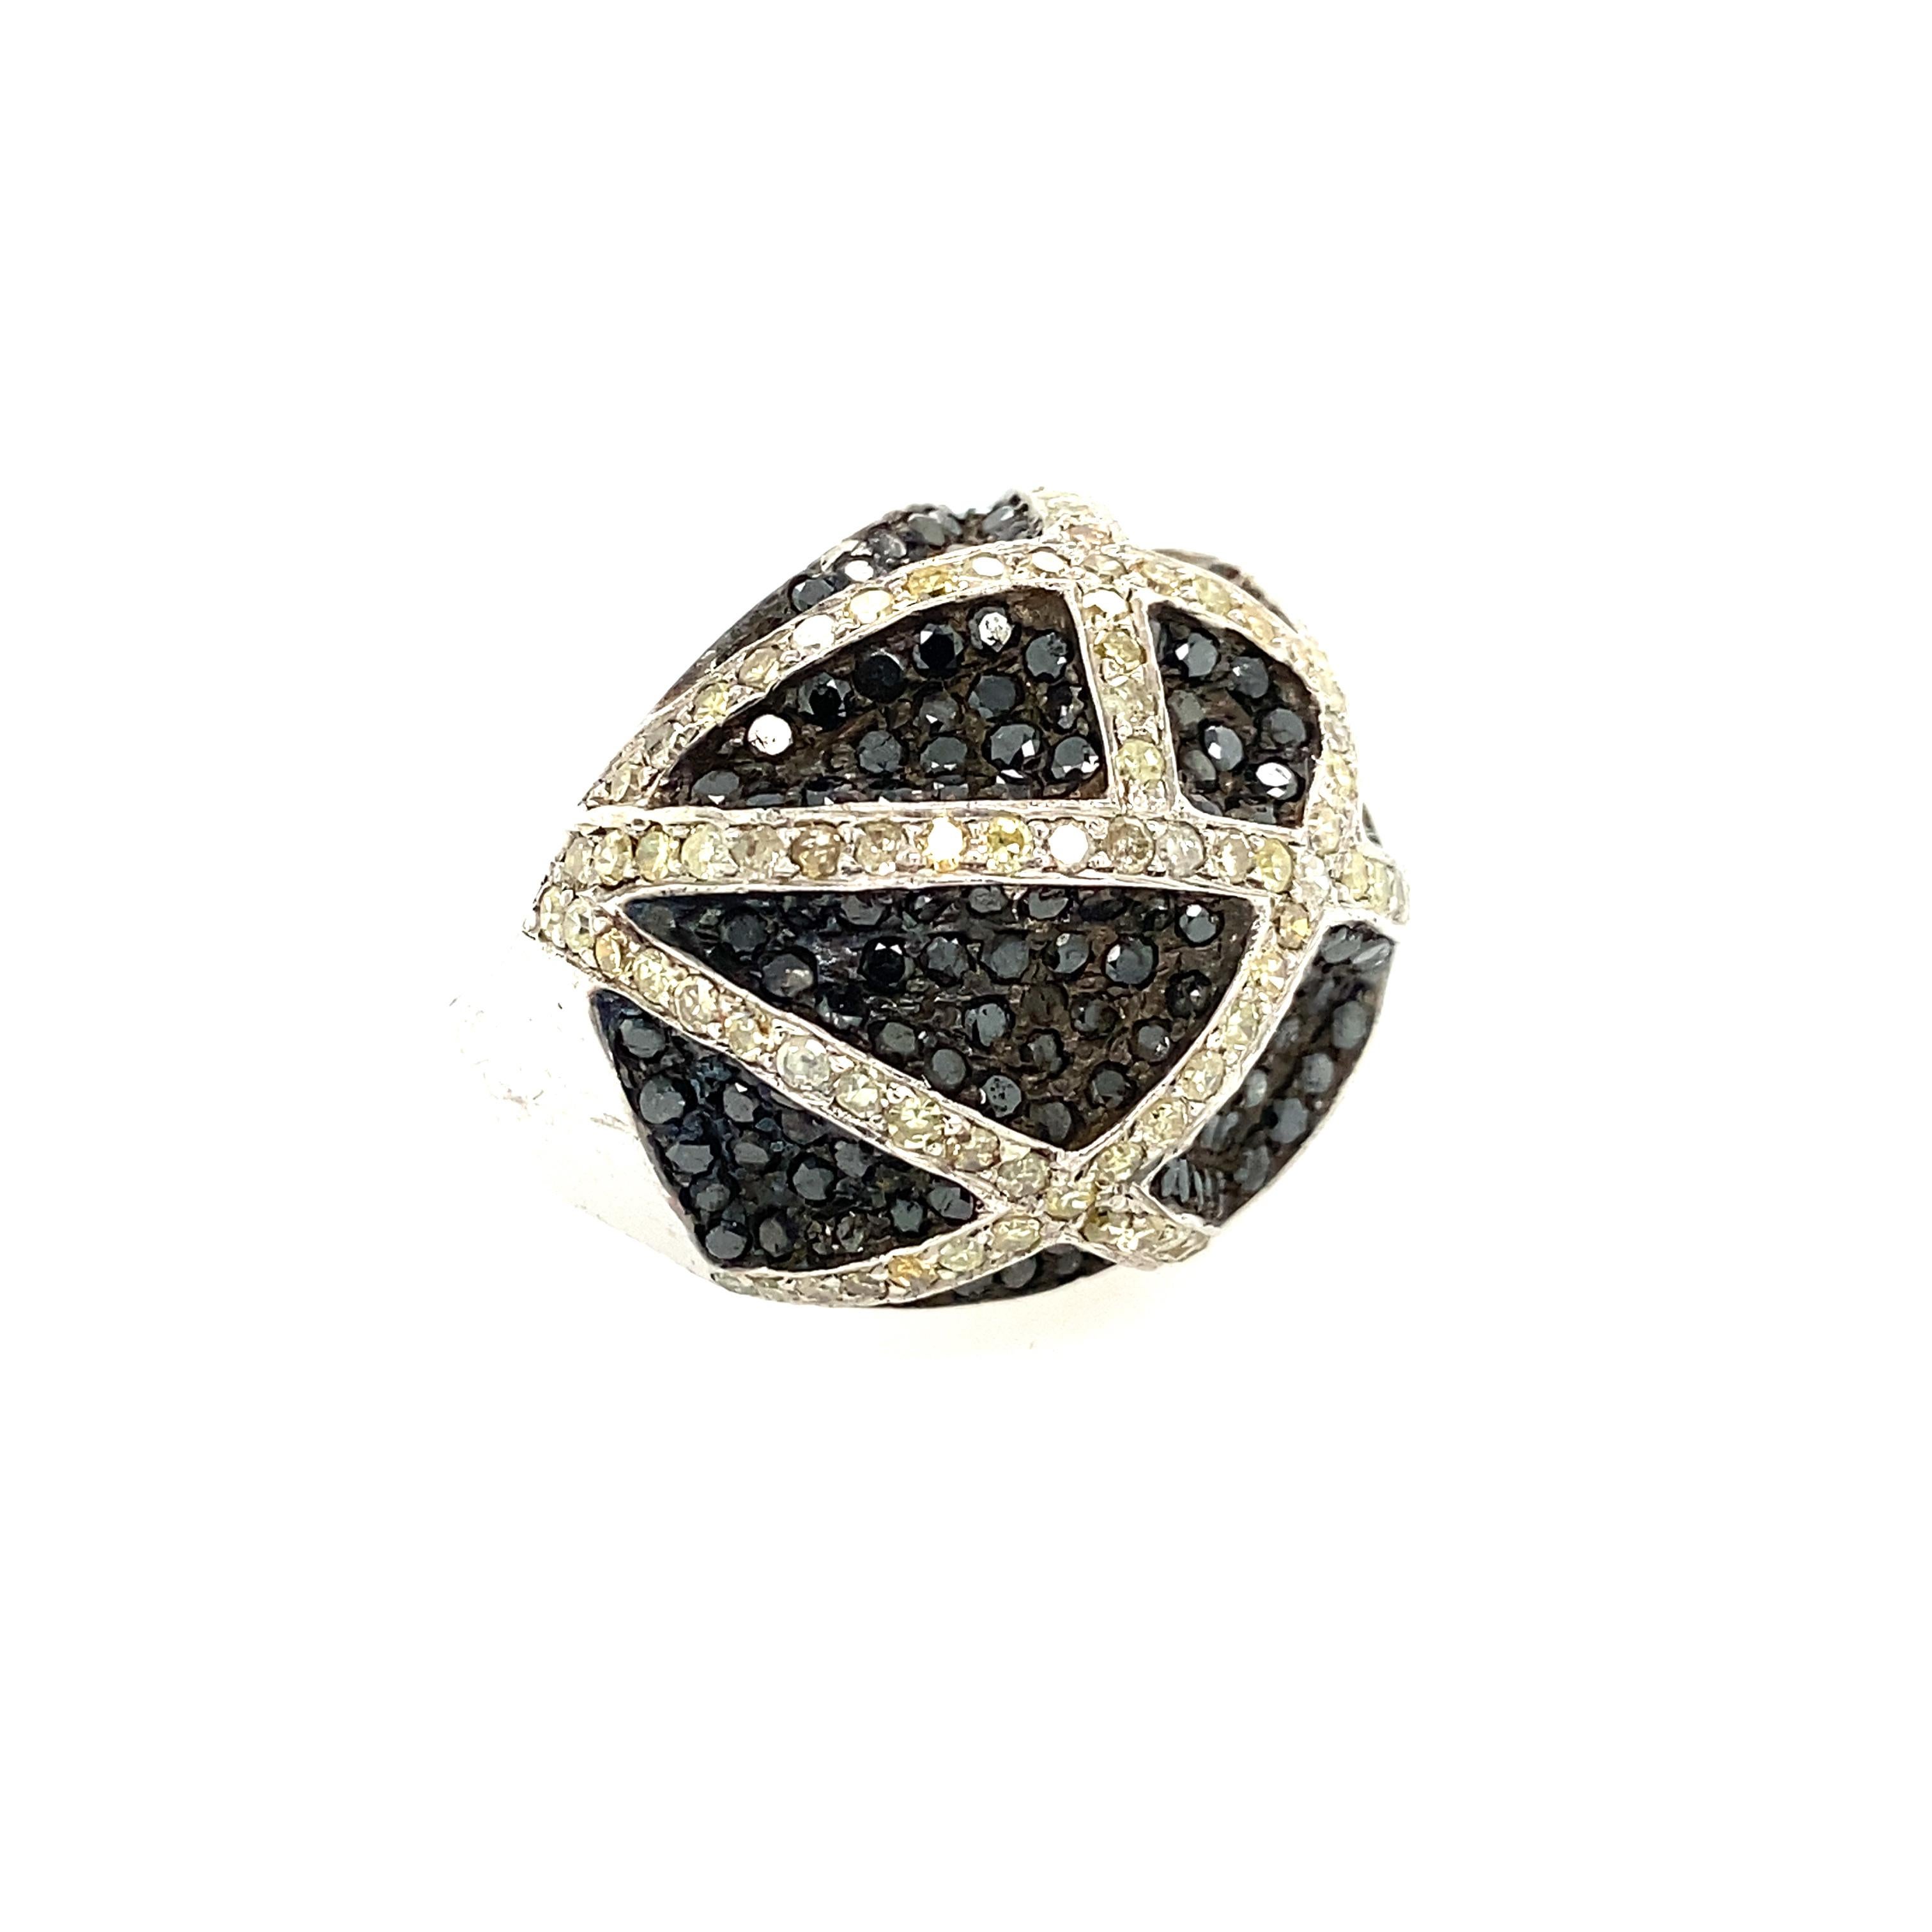 Rustic Collection

Rustic and black Diamond dome cocktail ring set in sterling silver. US size 7.5.

Diamond: 2.17ct total weight.
Black Diamond: 4.63ct total weight.